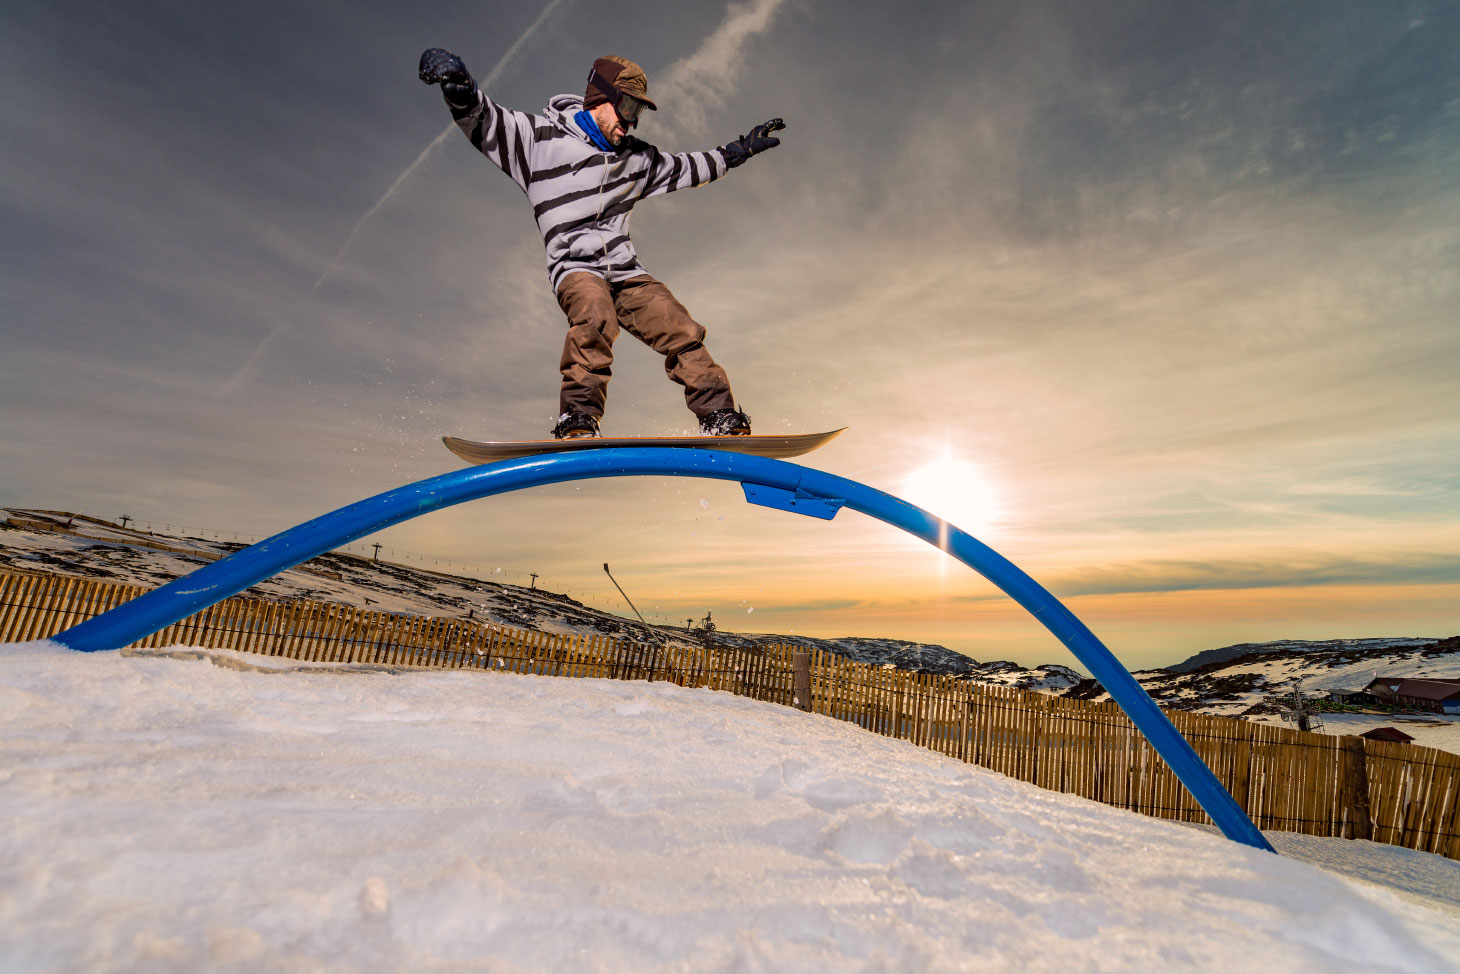 Snowboarder riding rail obstacle